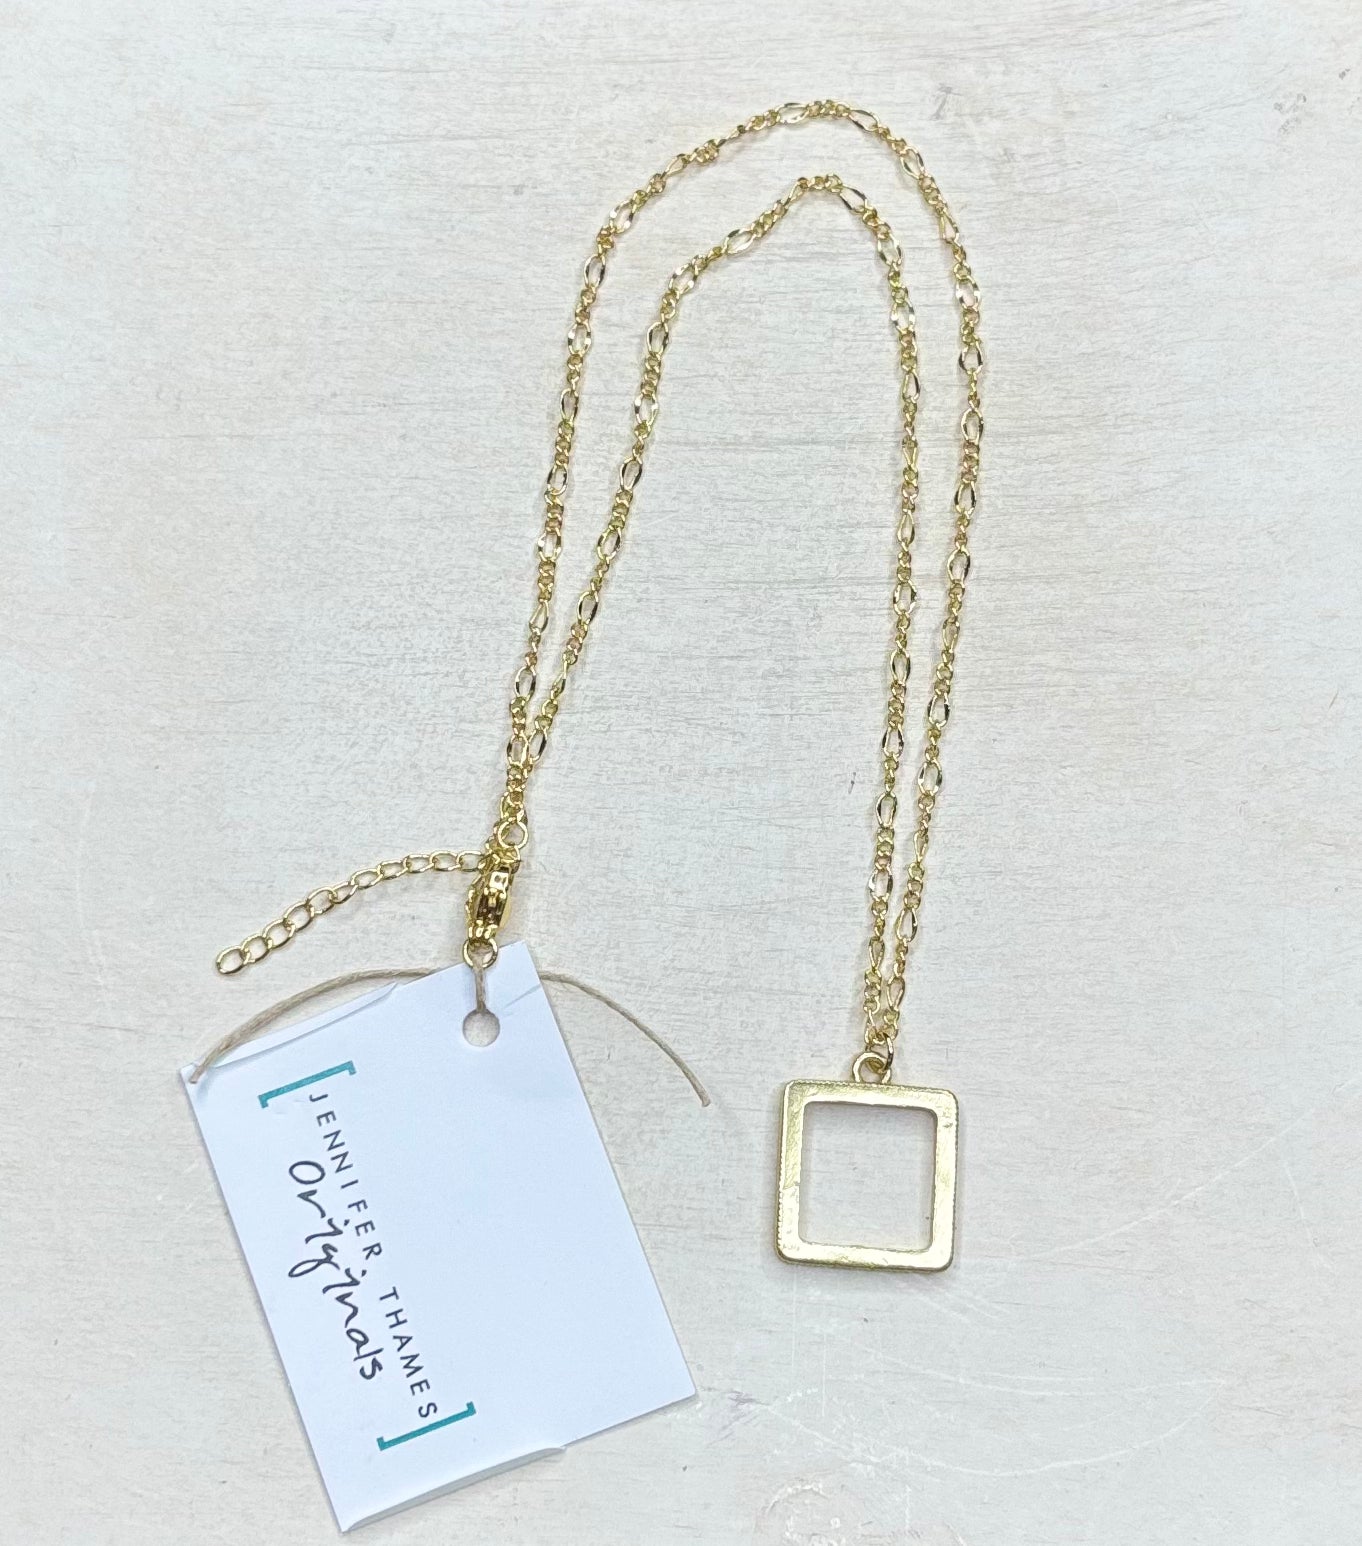 The Don’t be Square Necklace